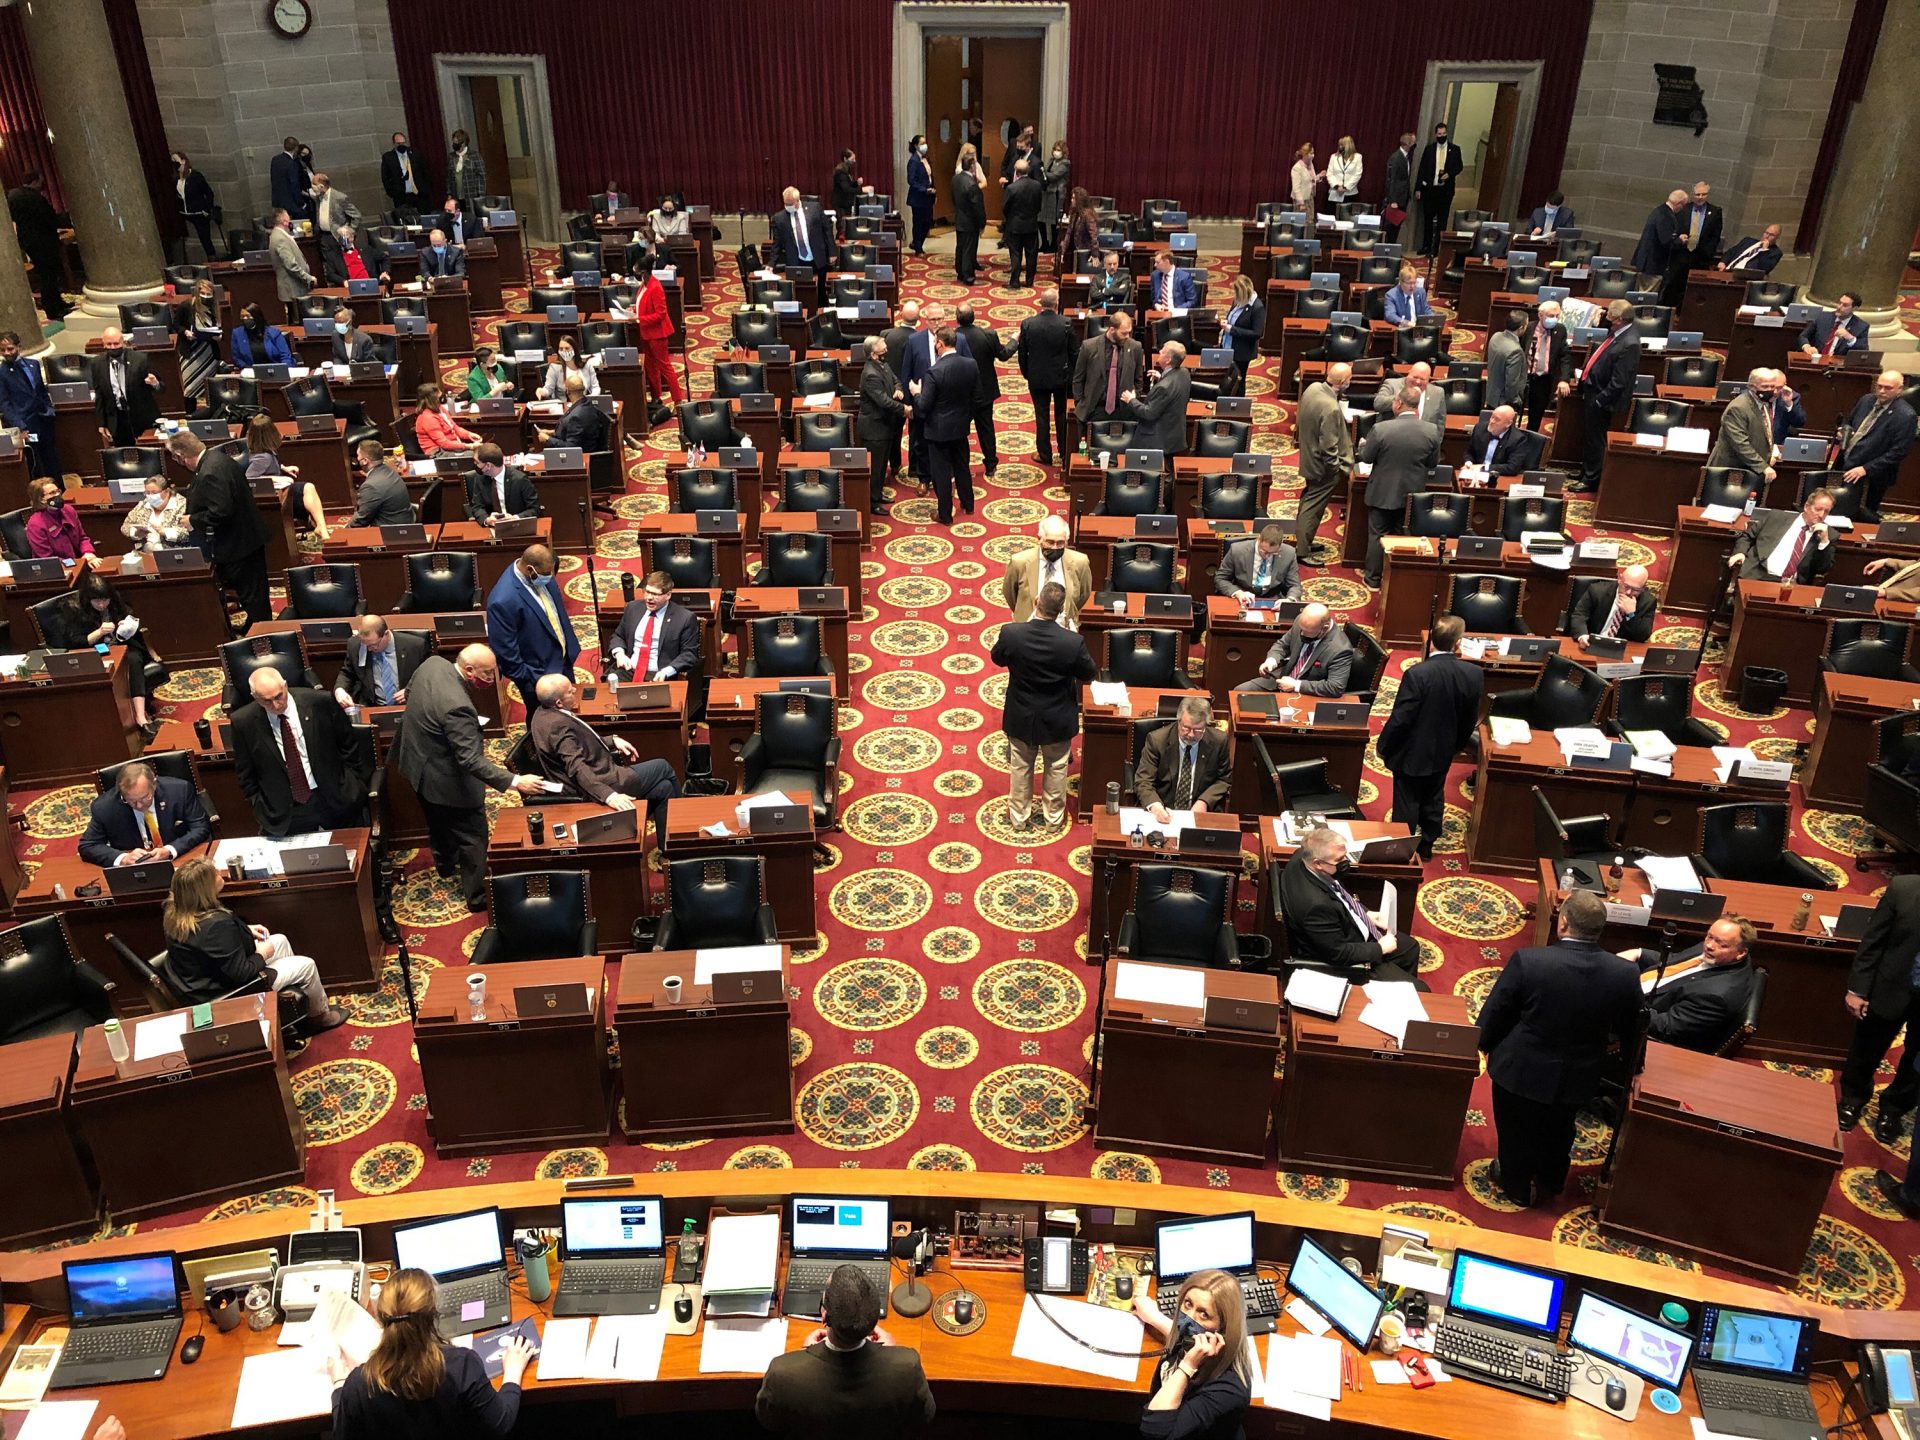 Members of the Missouri House gather in the chamber before the beginning of session on Wednesday, Feb. 3, 2021, in Jefferson City, Mo. The House chamber has no mask mandate and has not modified its seating during the coronavirus pandemic. The House canceled all work for a full week in January after a COVID-19 outbreak.